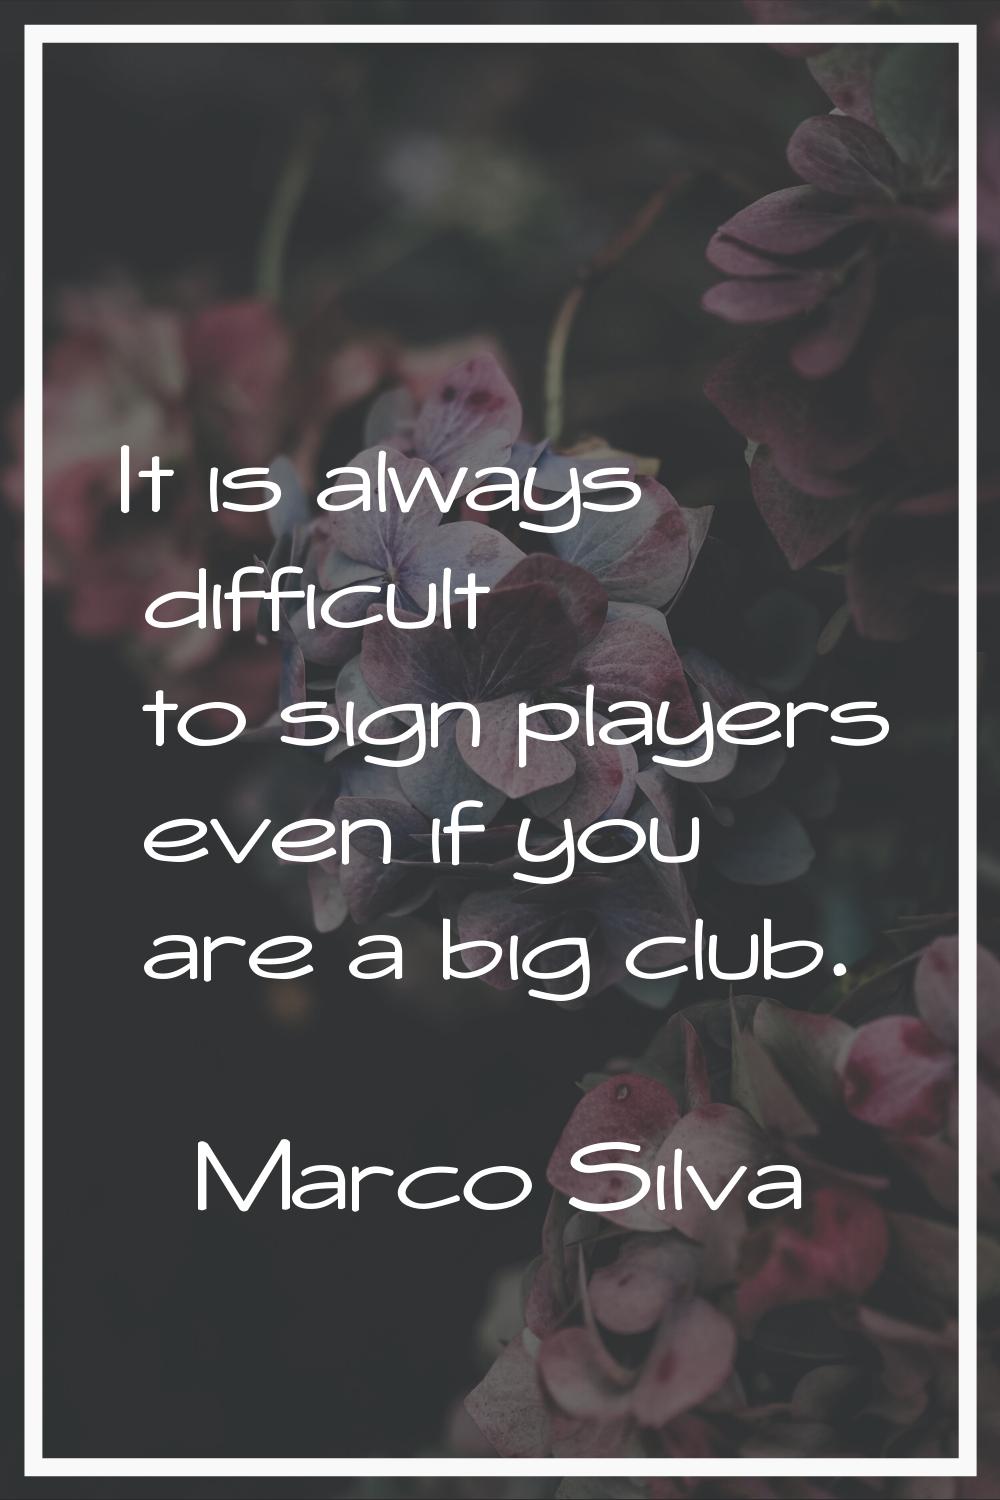 It is always difficult to sign players even if you are a big club.